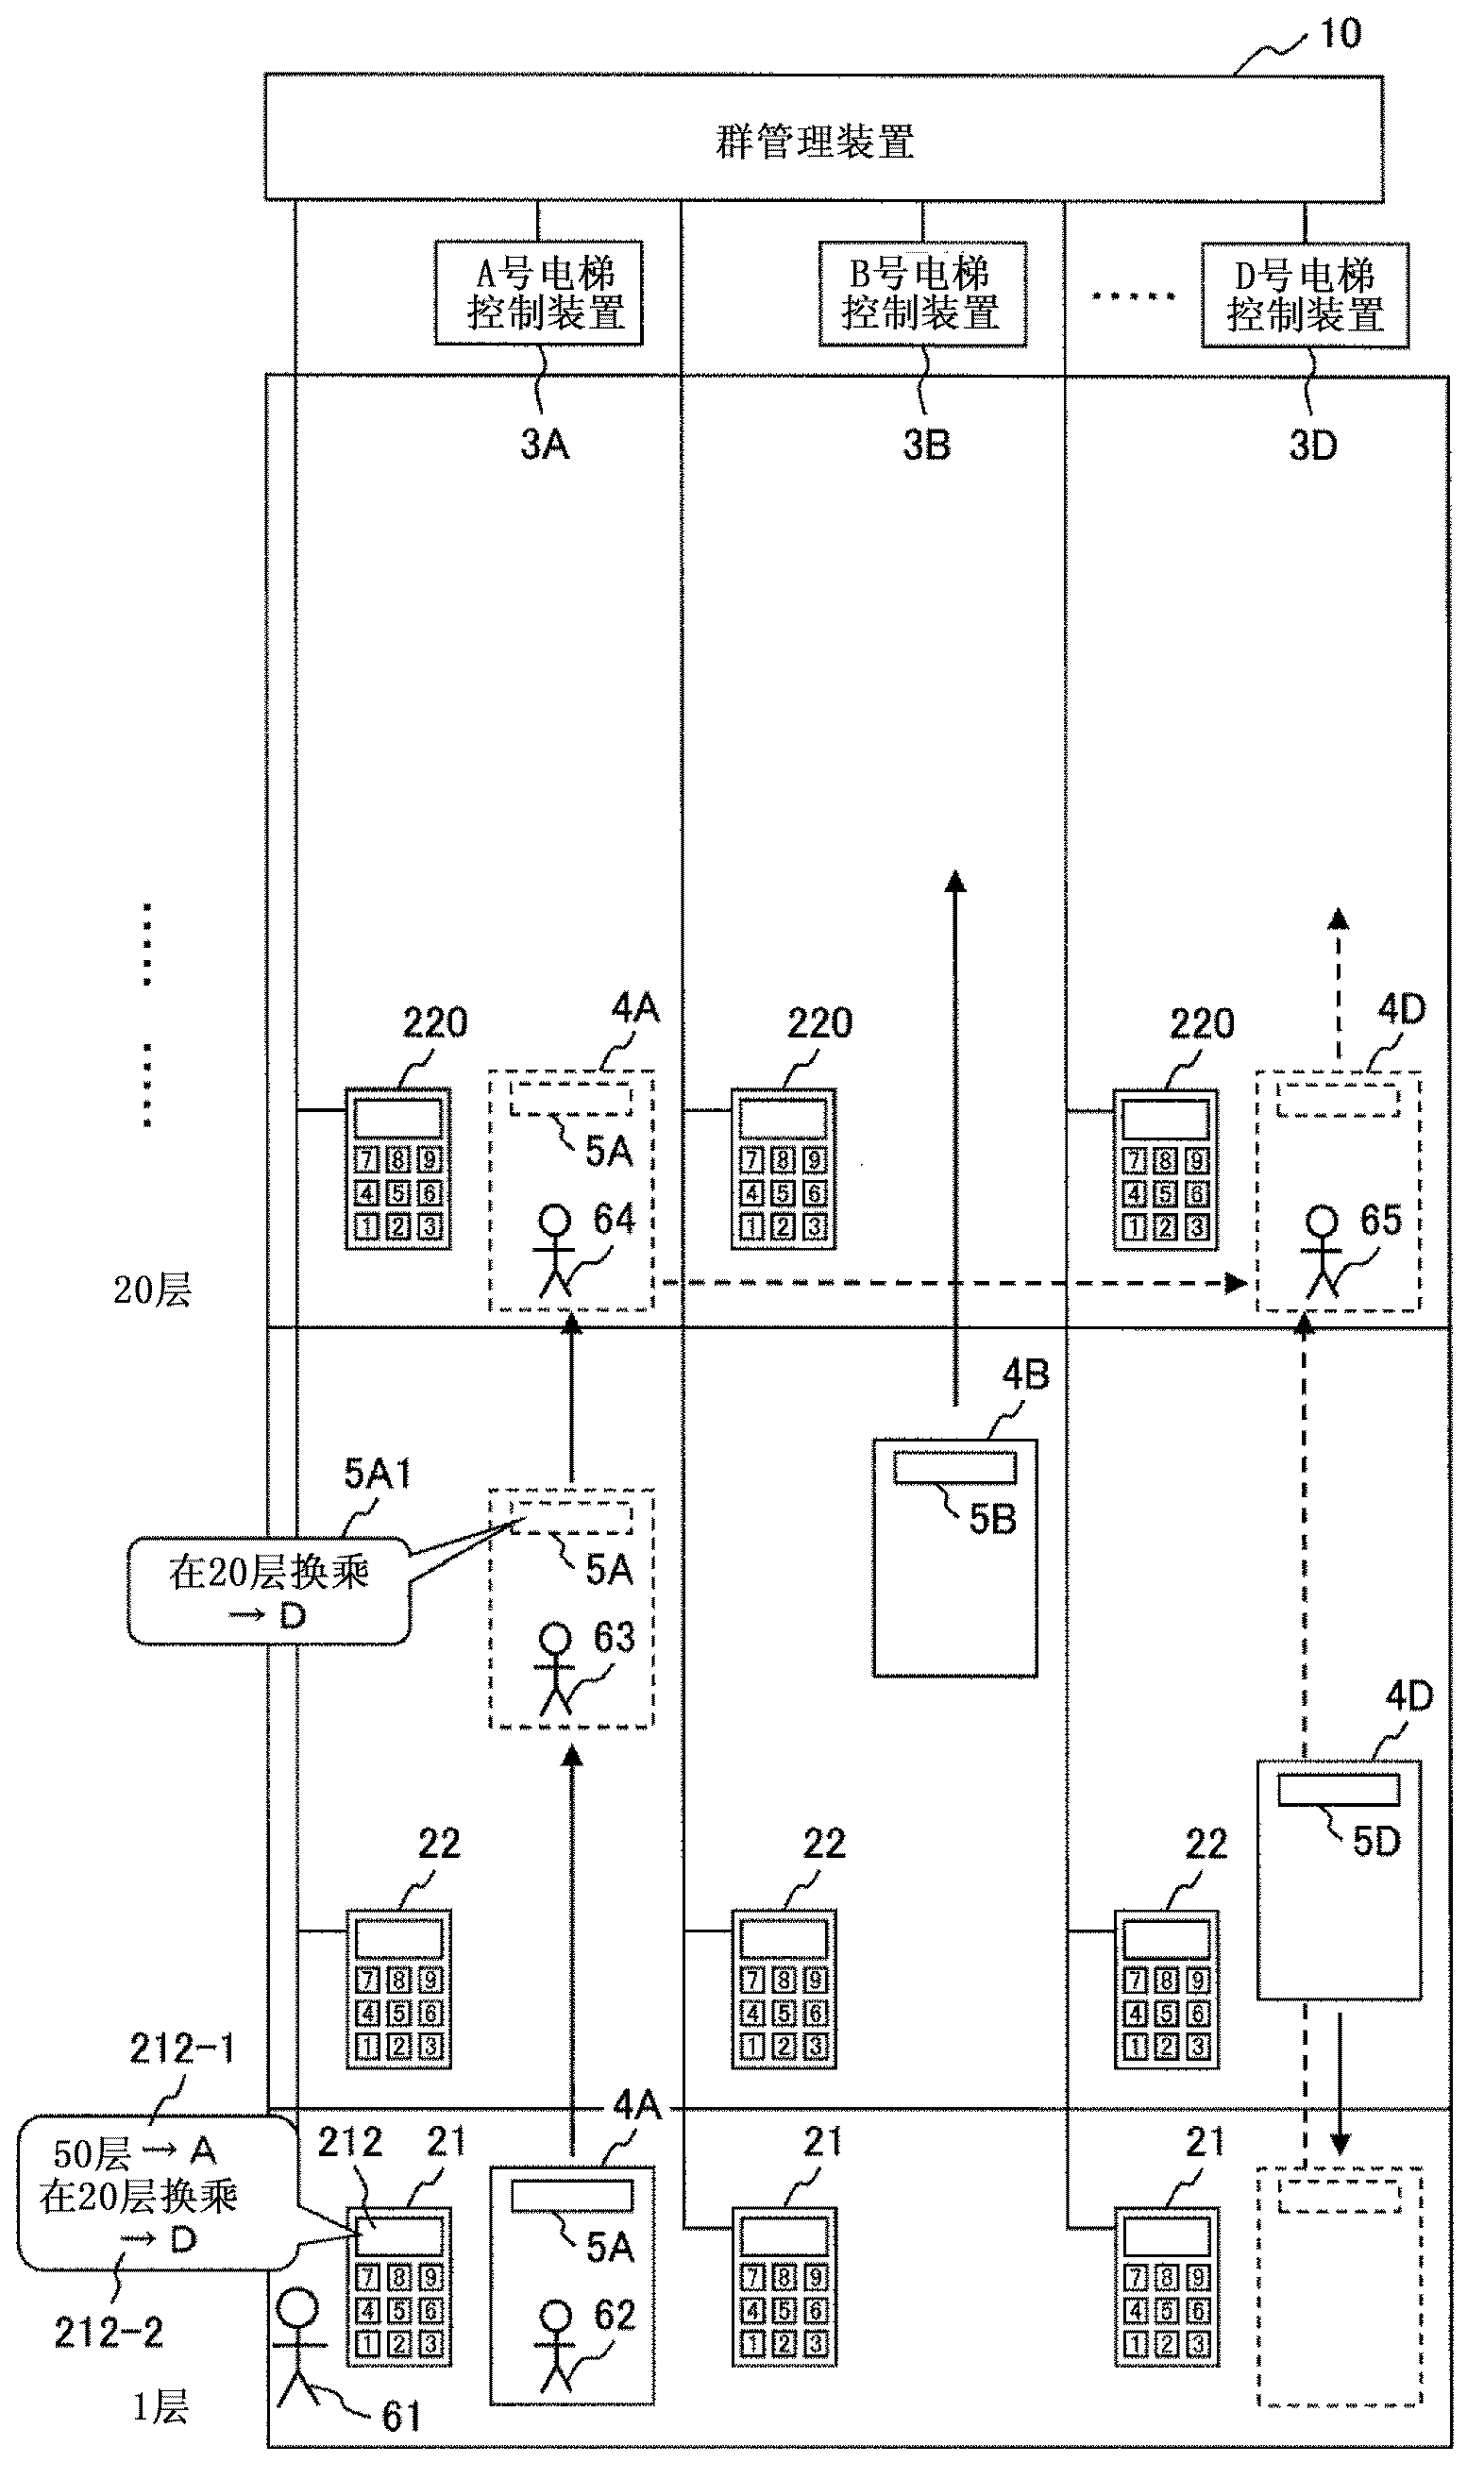 Elevator group management system and control method thereof